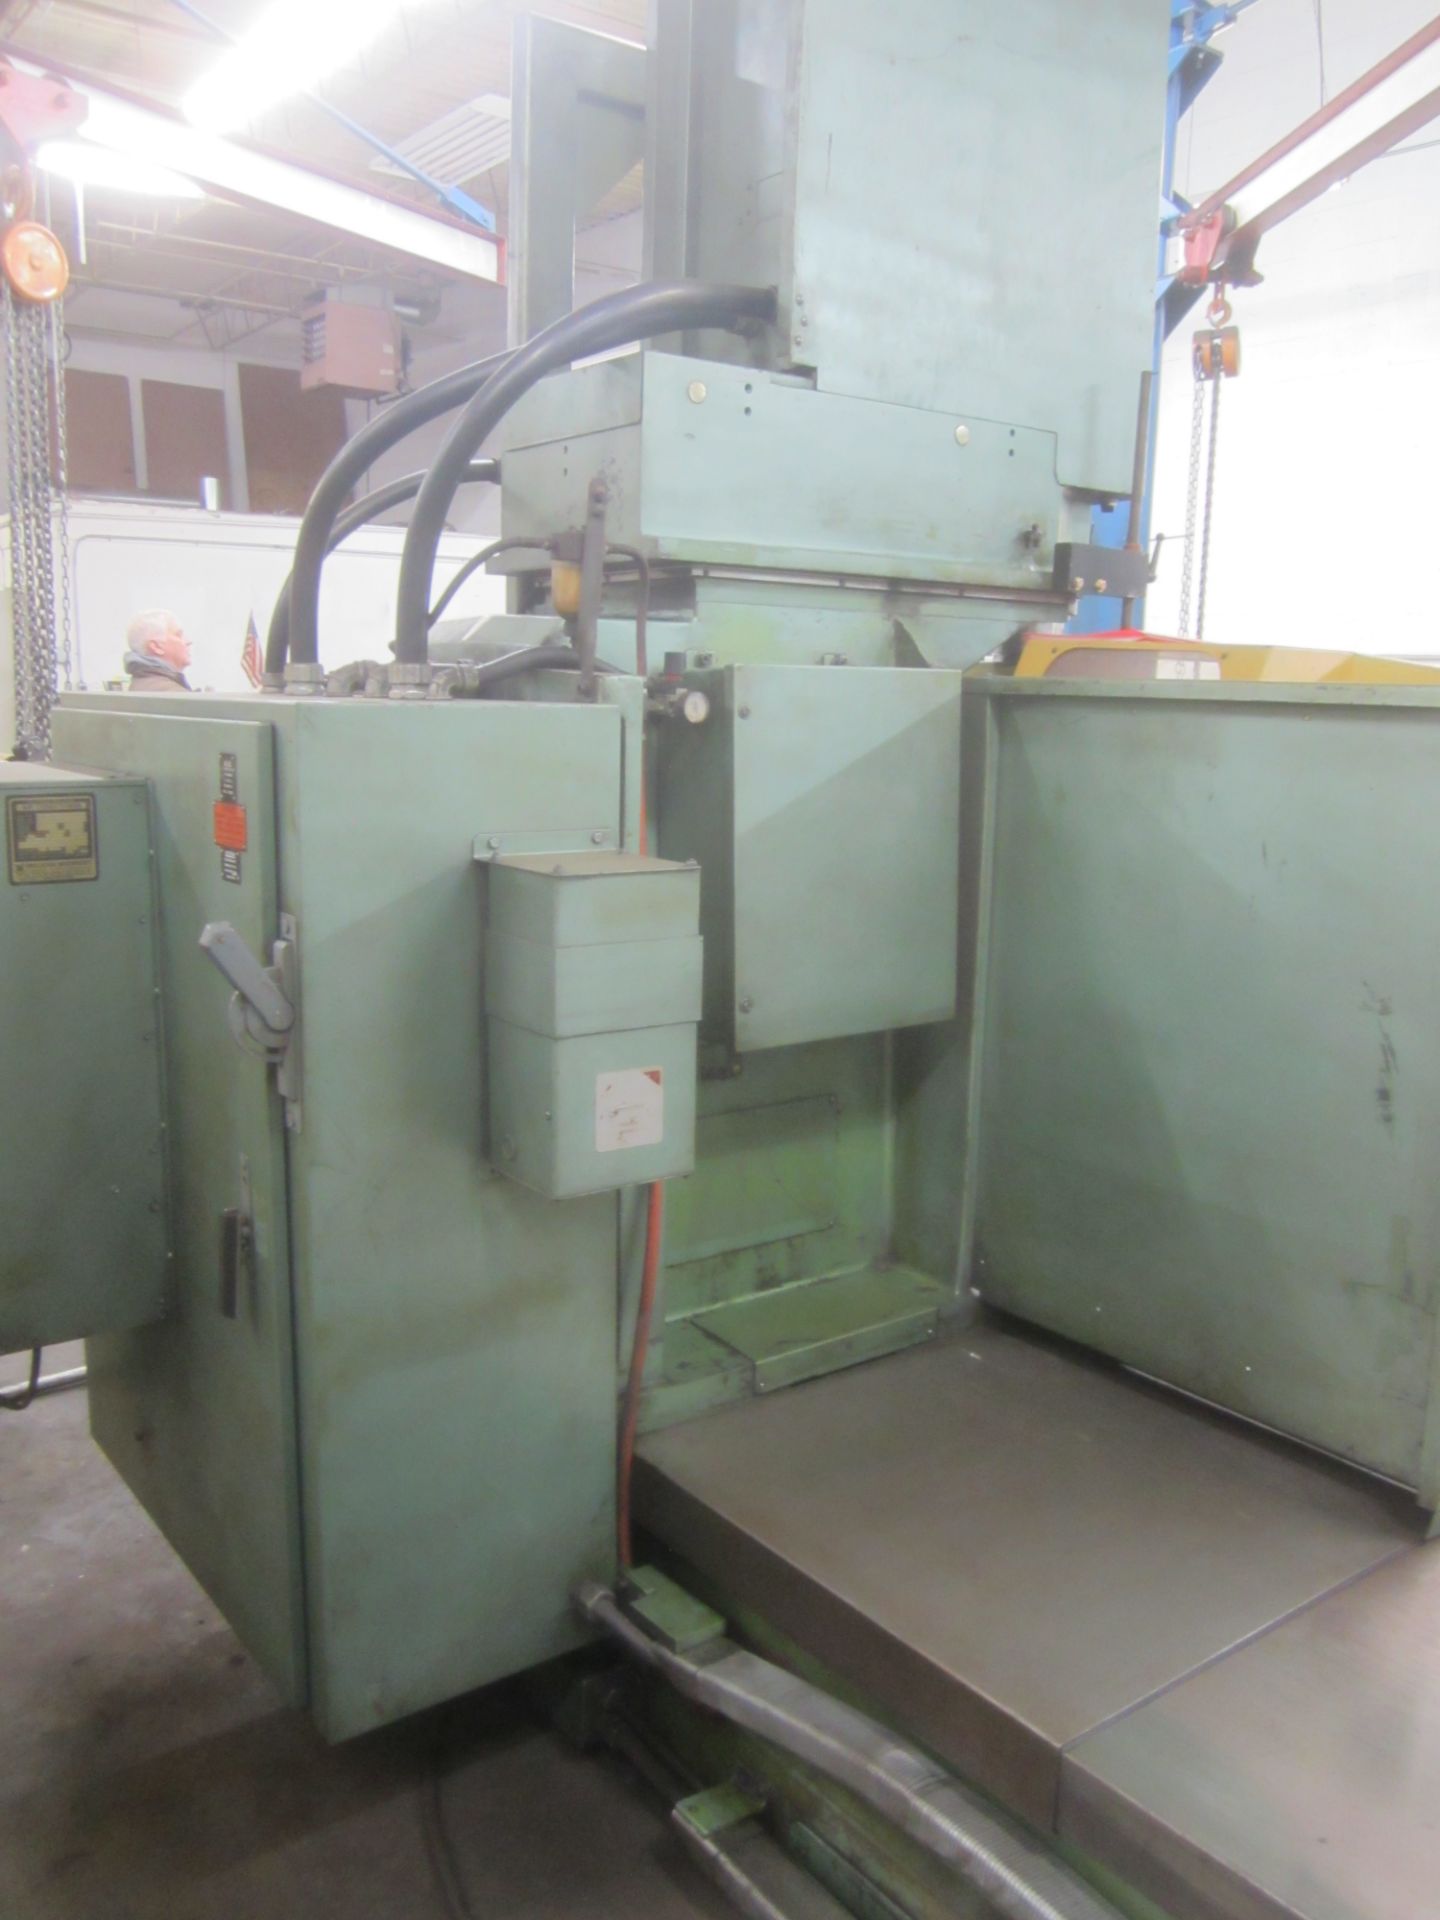 Rottler Model F-88-E Floor Type Vertical Cylinder Borer and Machining Mill, s/n 18039, with Burr- - Image 8 of 11